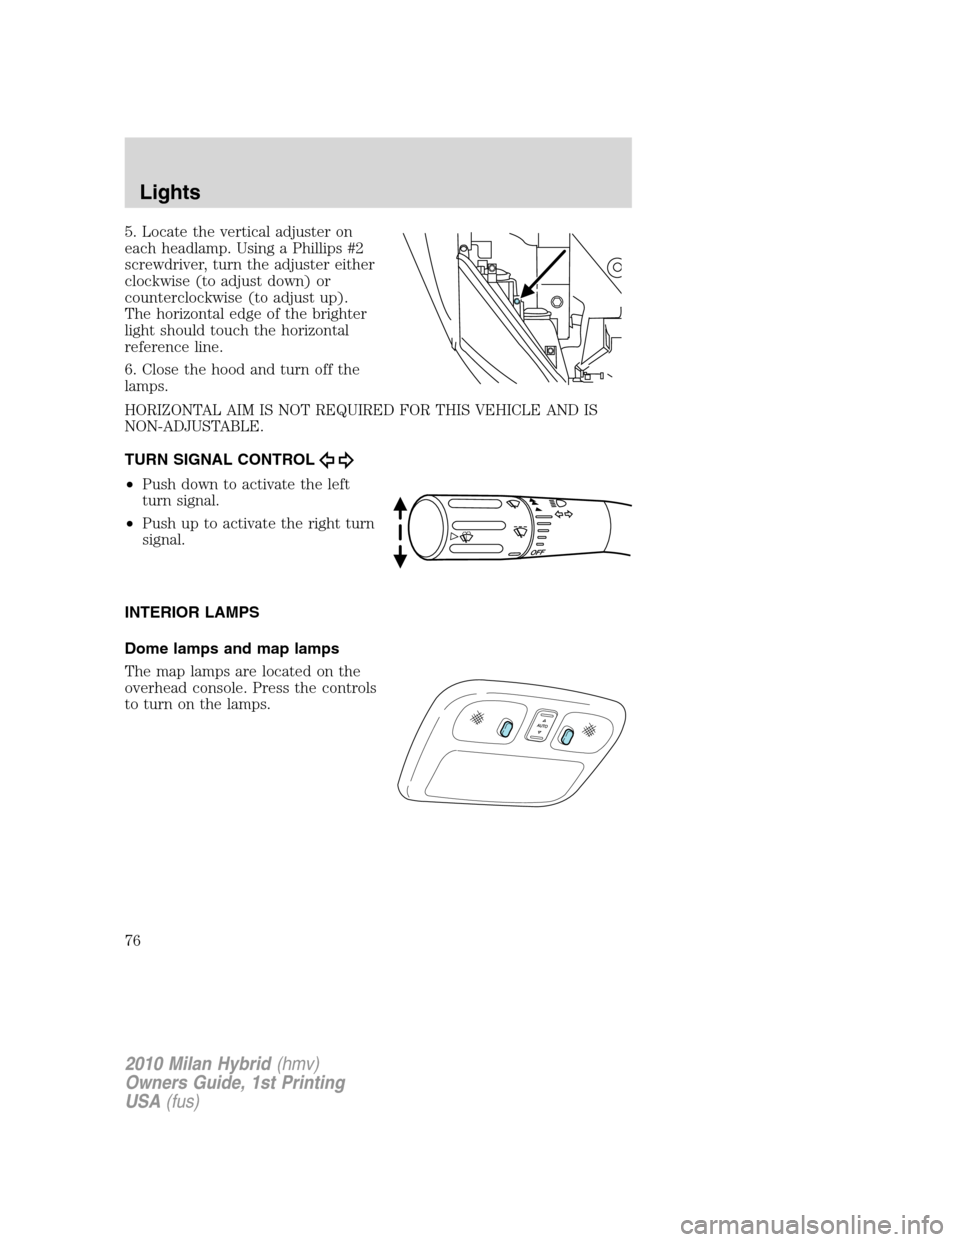 Mercury Milan Hybrid 2010  Owners Manuals 5. Locate the vertical adjuster on
each headlamp. Using a Phillips #2
screwdriver, turn the adjuster either
clockwise (to adjust down) or
counterclockwise (to adjust up).
The horizontal edge of the br